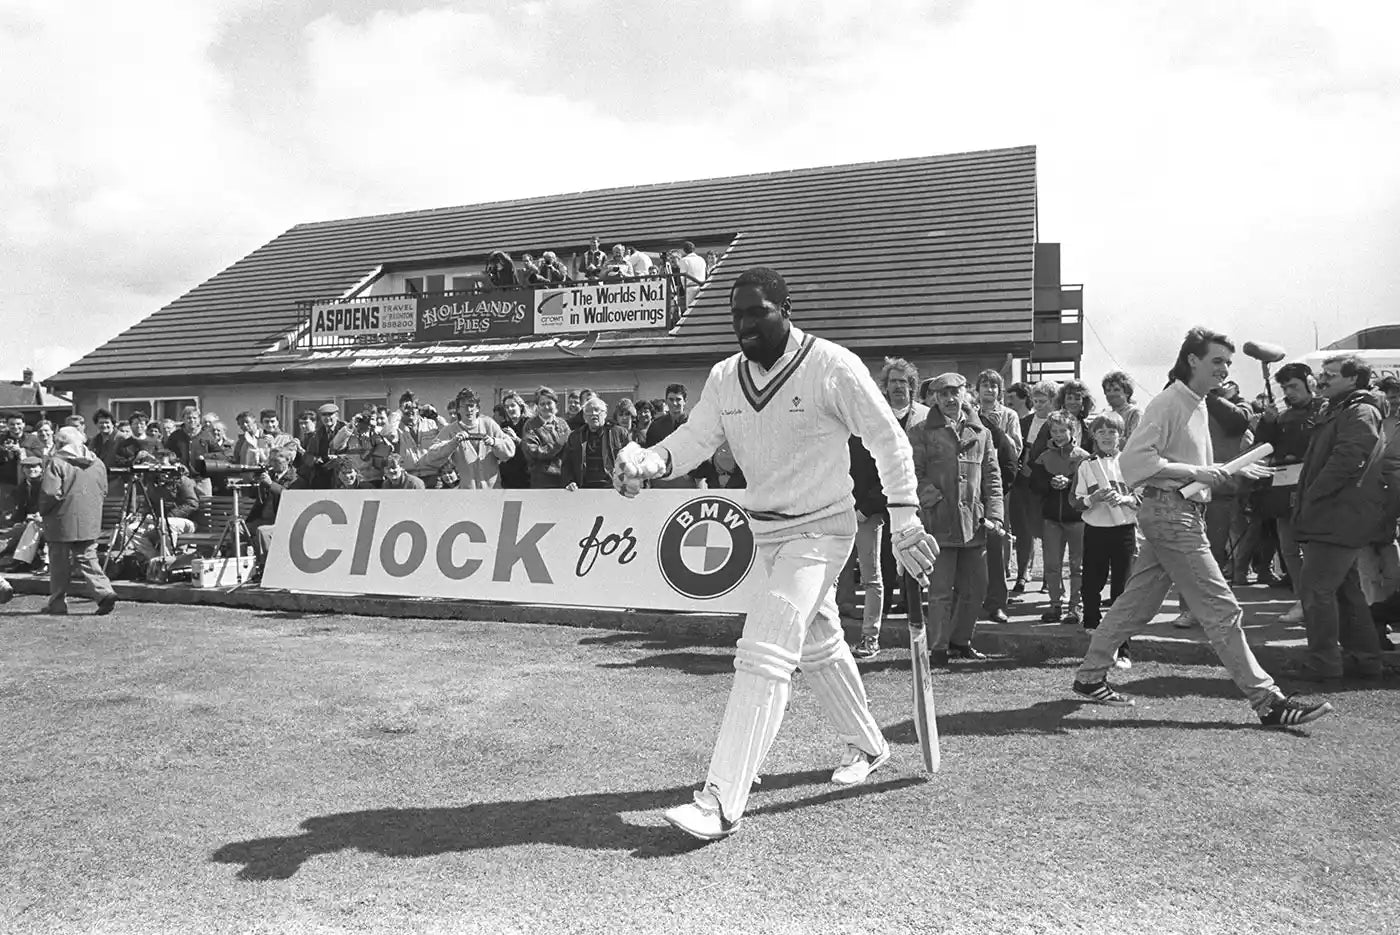 Sir Vivian Richards walks out to bat in his trademark style, without the helmet